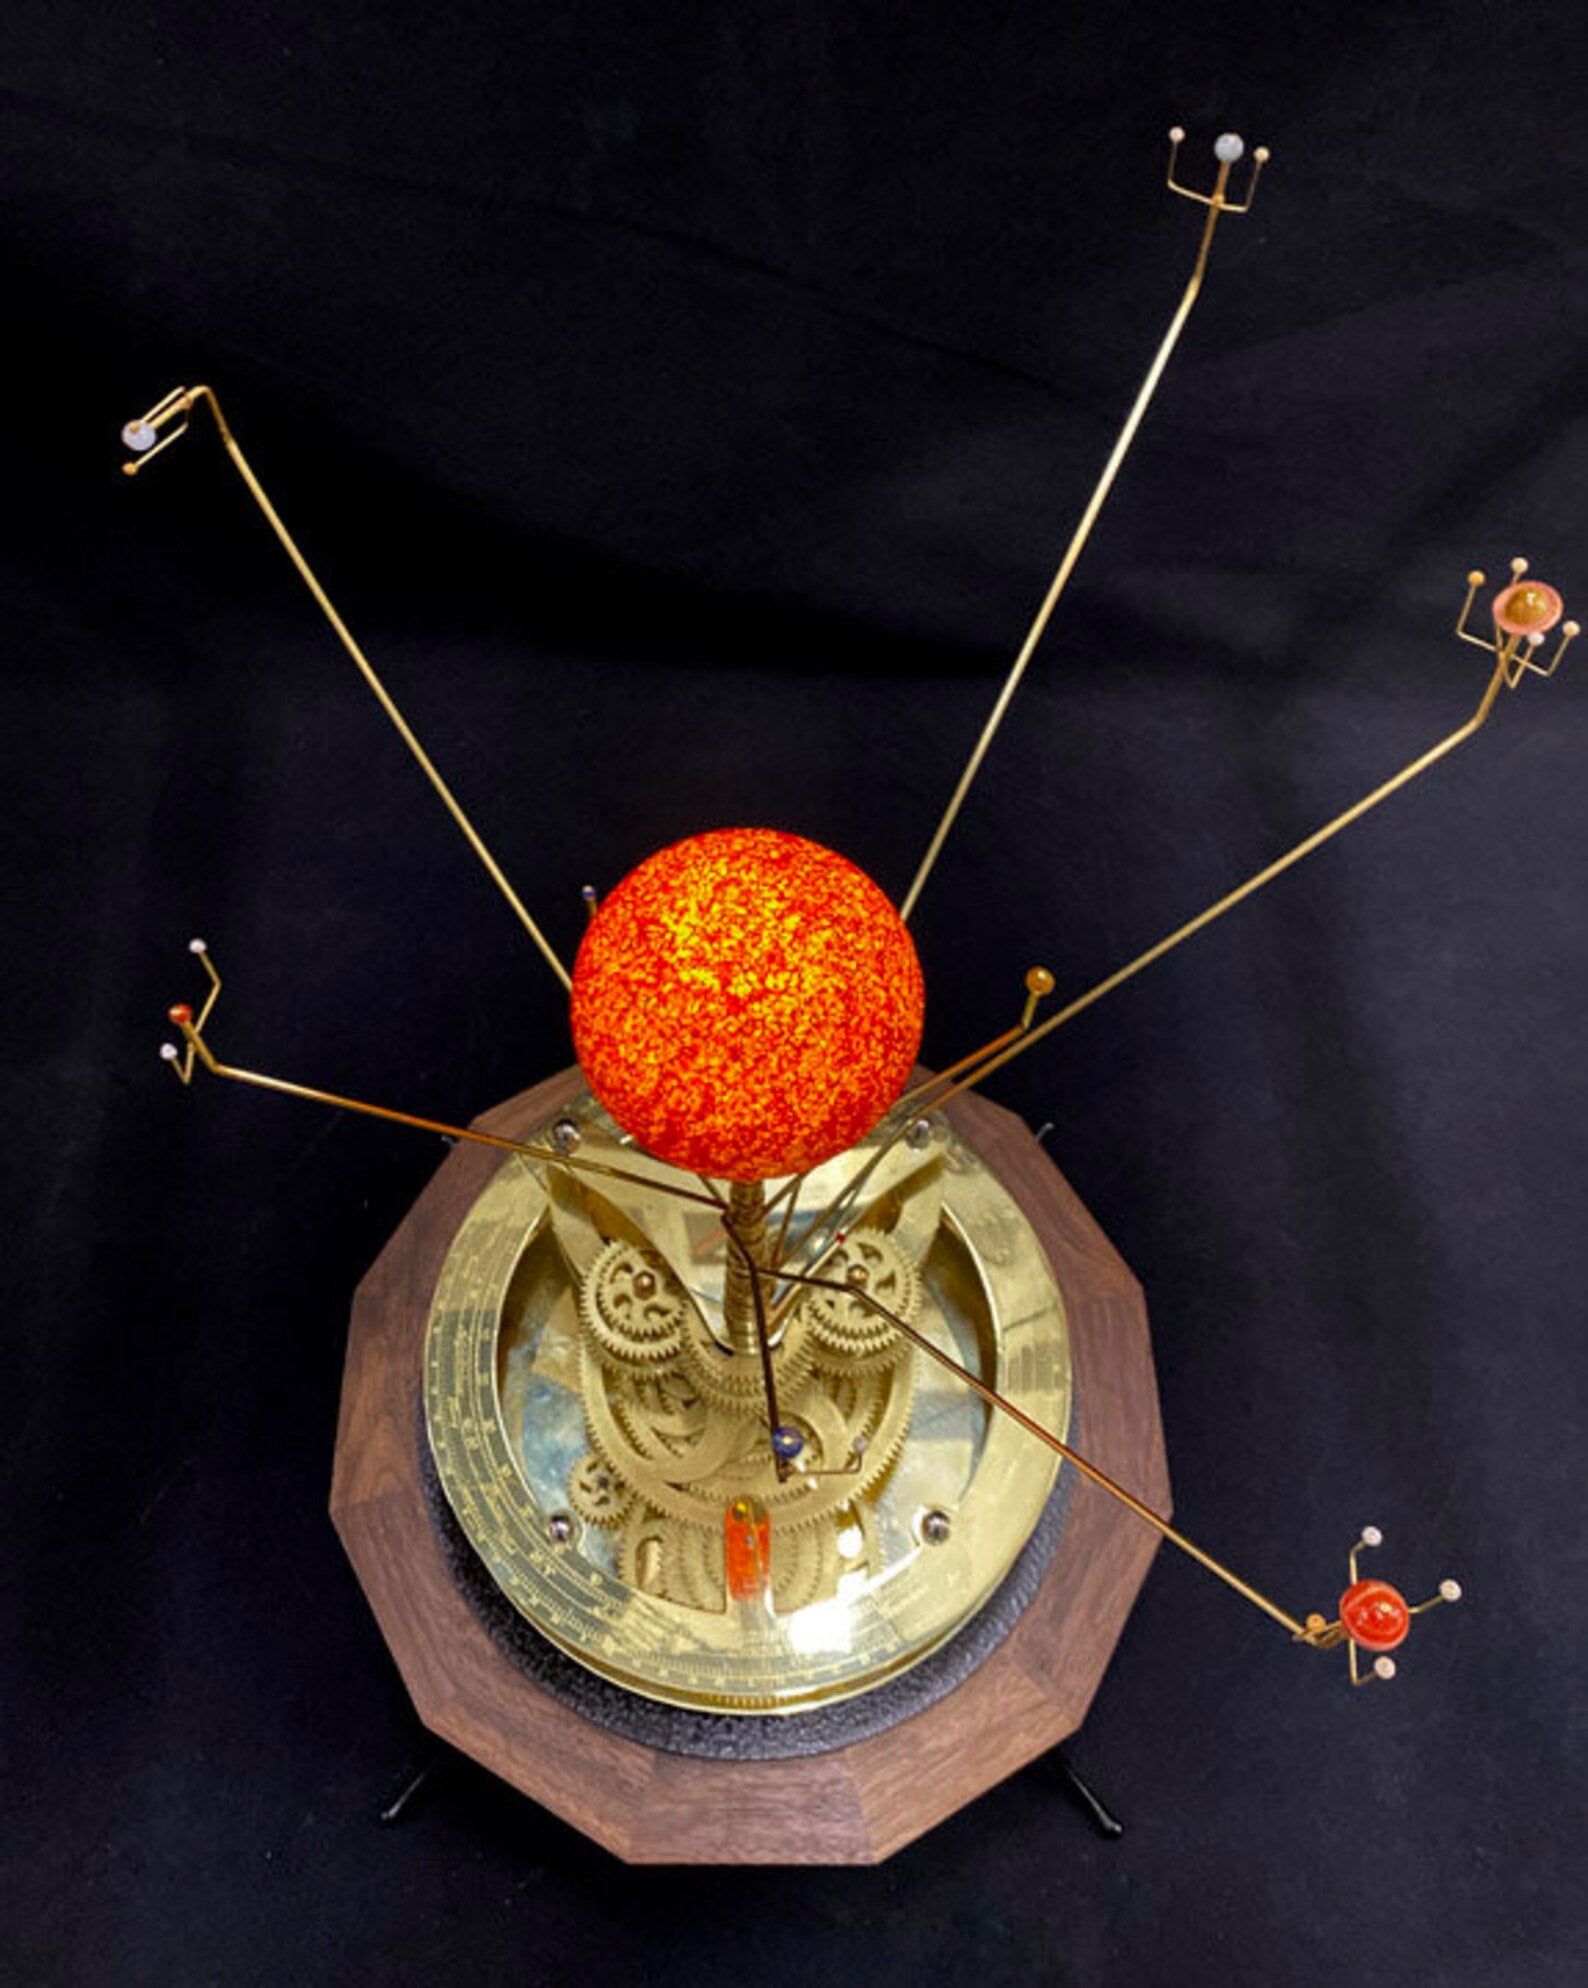 Renaissance Orrery depicting the 8 planets and Sun in correct relative motion. The hand painted Sun and solid brass gearworks sit on a solid walnut base.